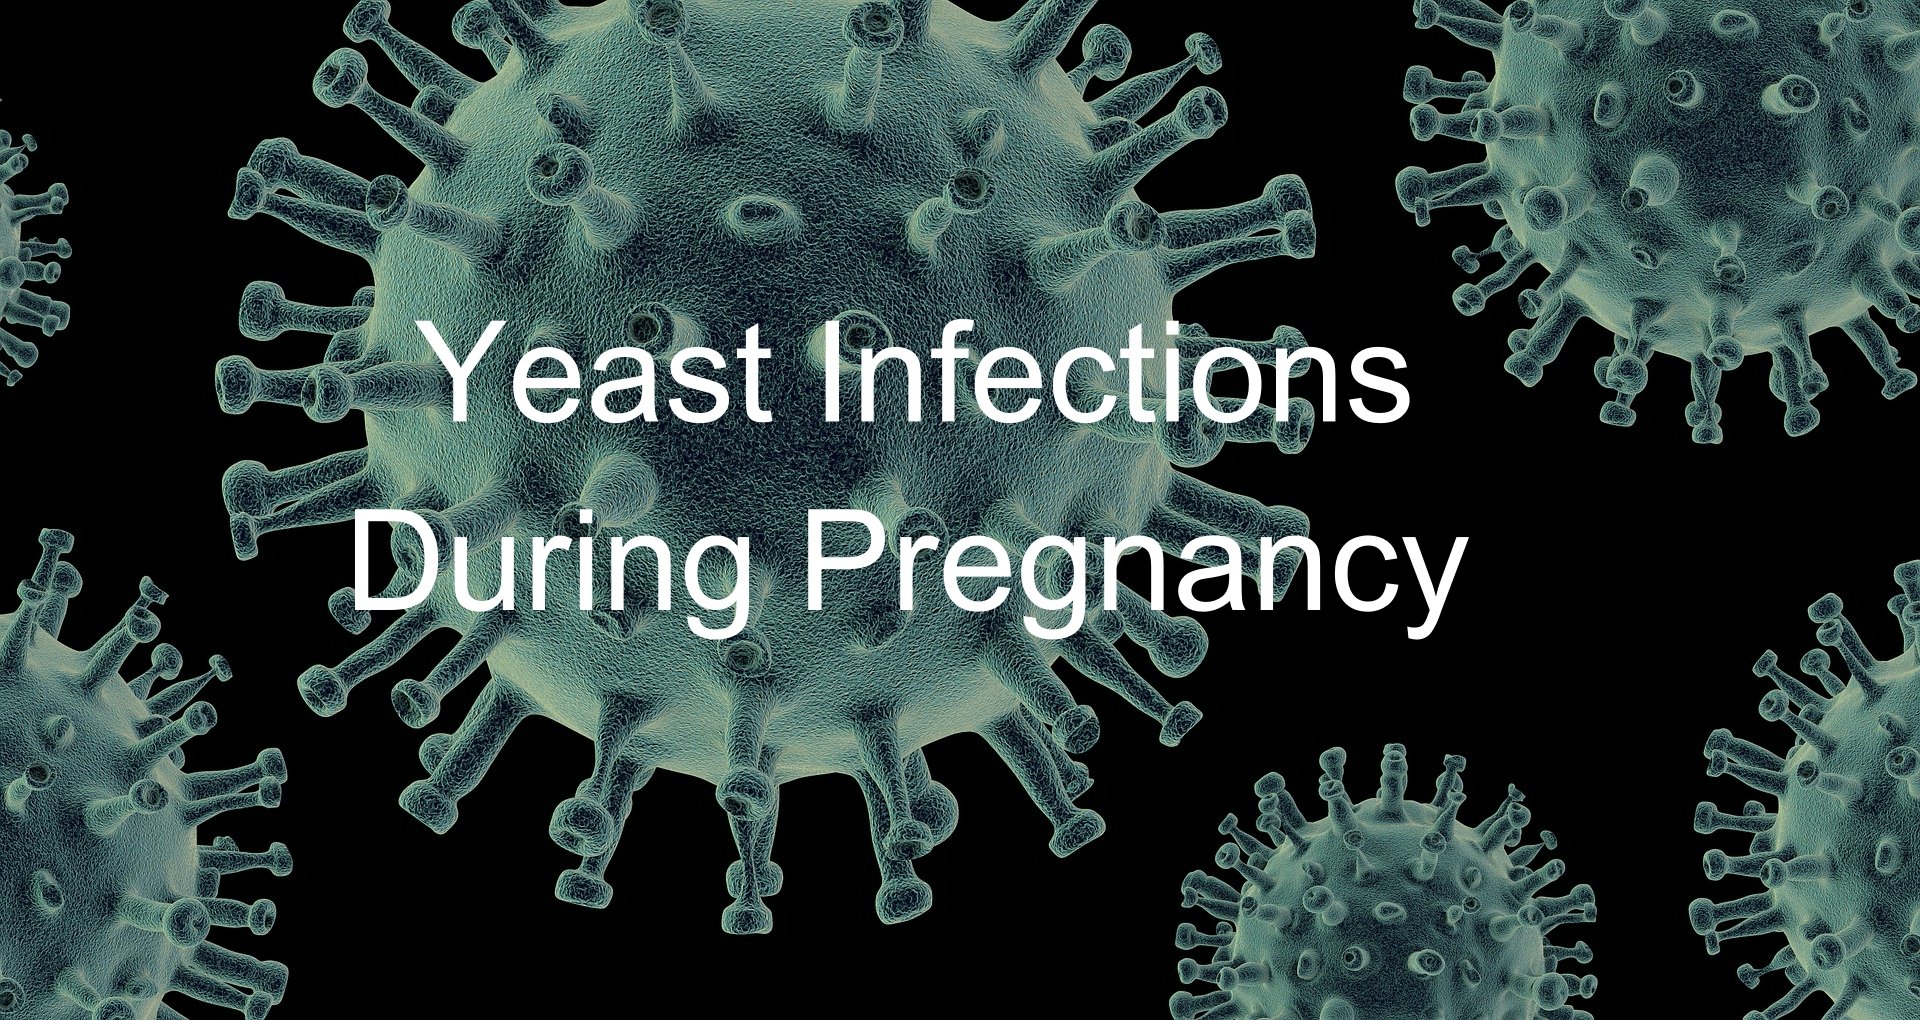 Yeast infection? I usually get them around the time of my period